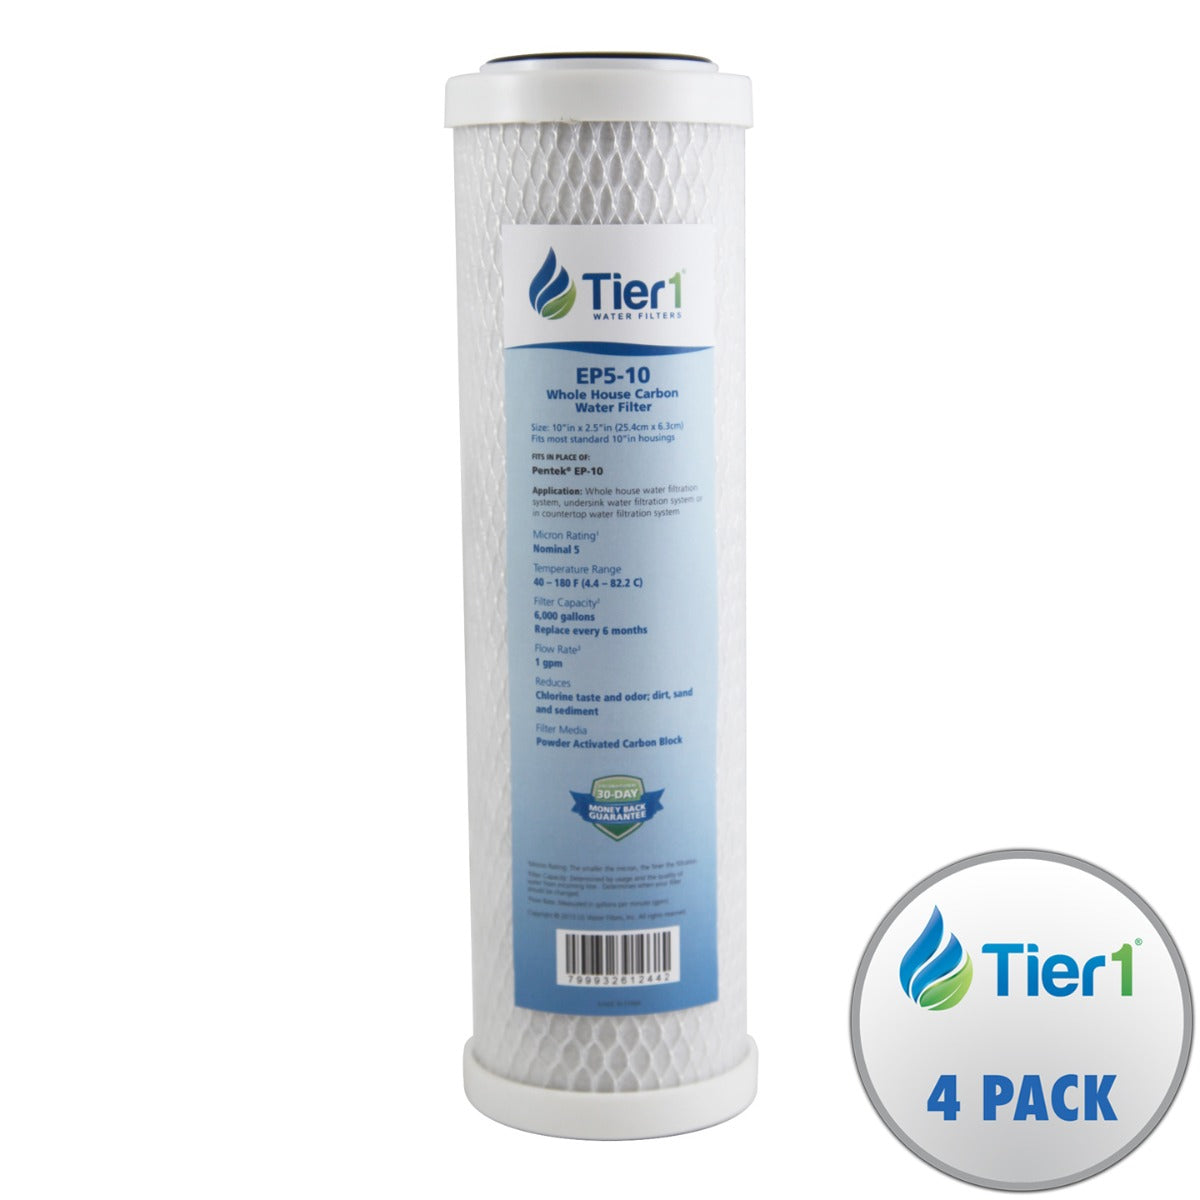 10 X 2.5 Carbon Block Replacement Filter by Tier1 (5 micron)